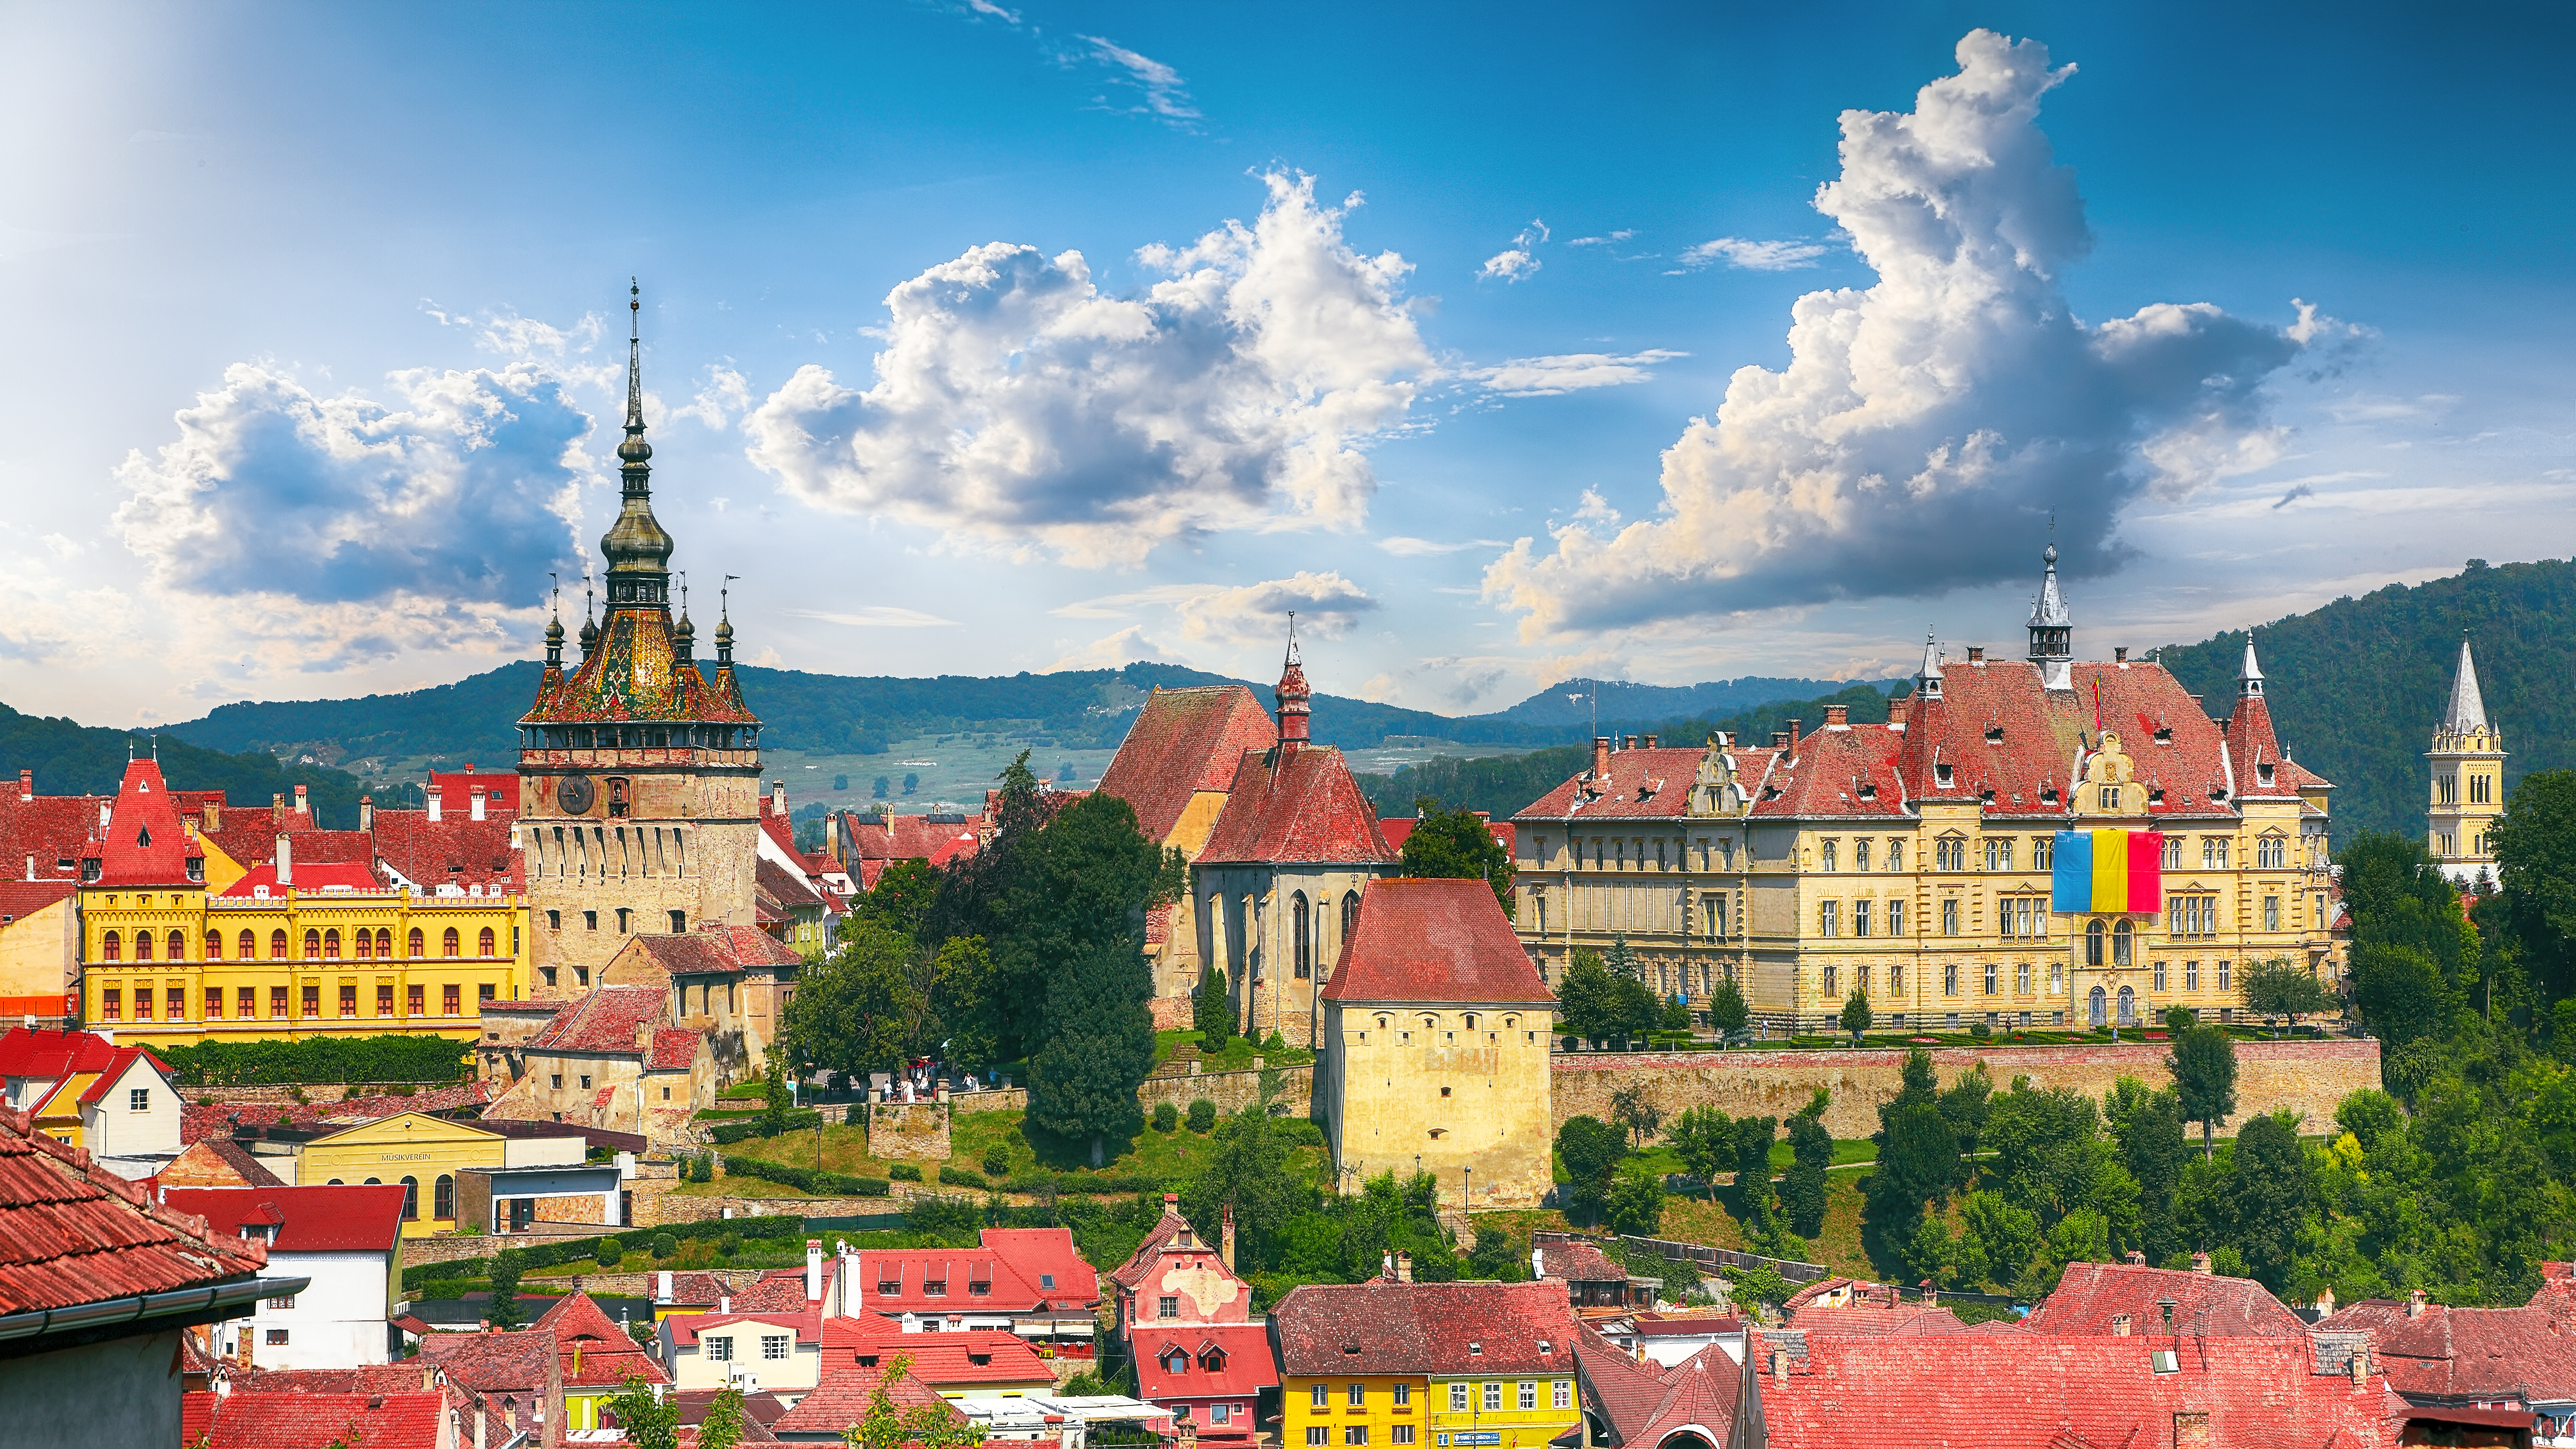 Panoramic summer view over the medieval cityscape architecture in Sighisoara town, historical region of Transylvania, Romania, Europe